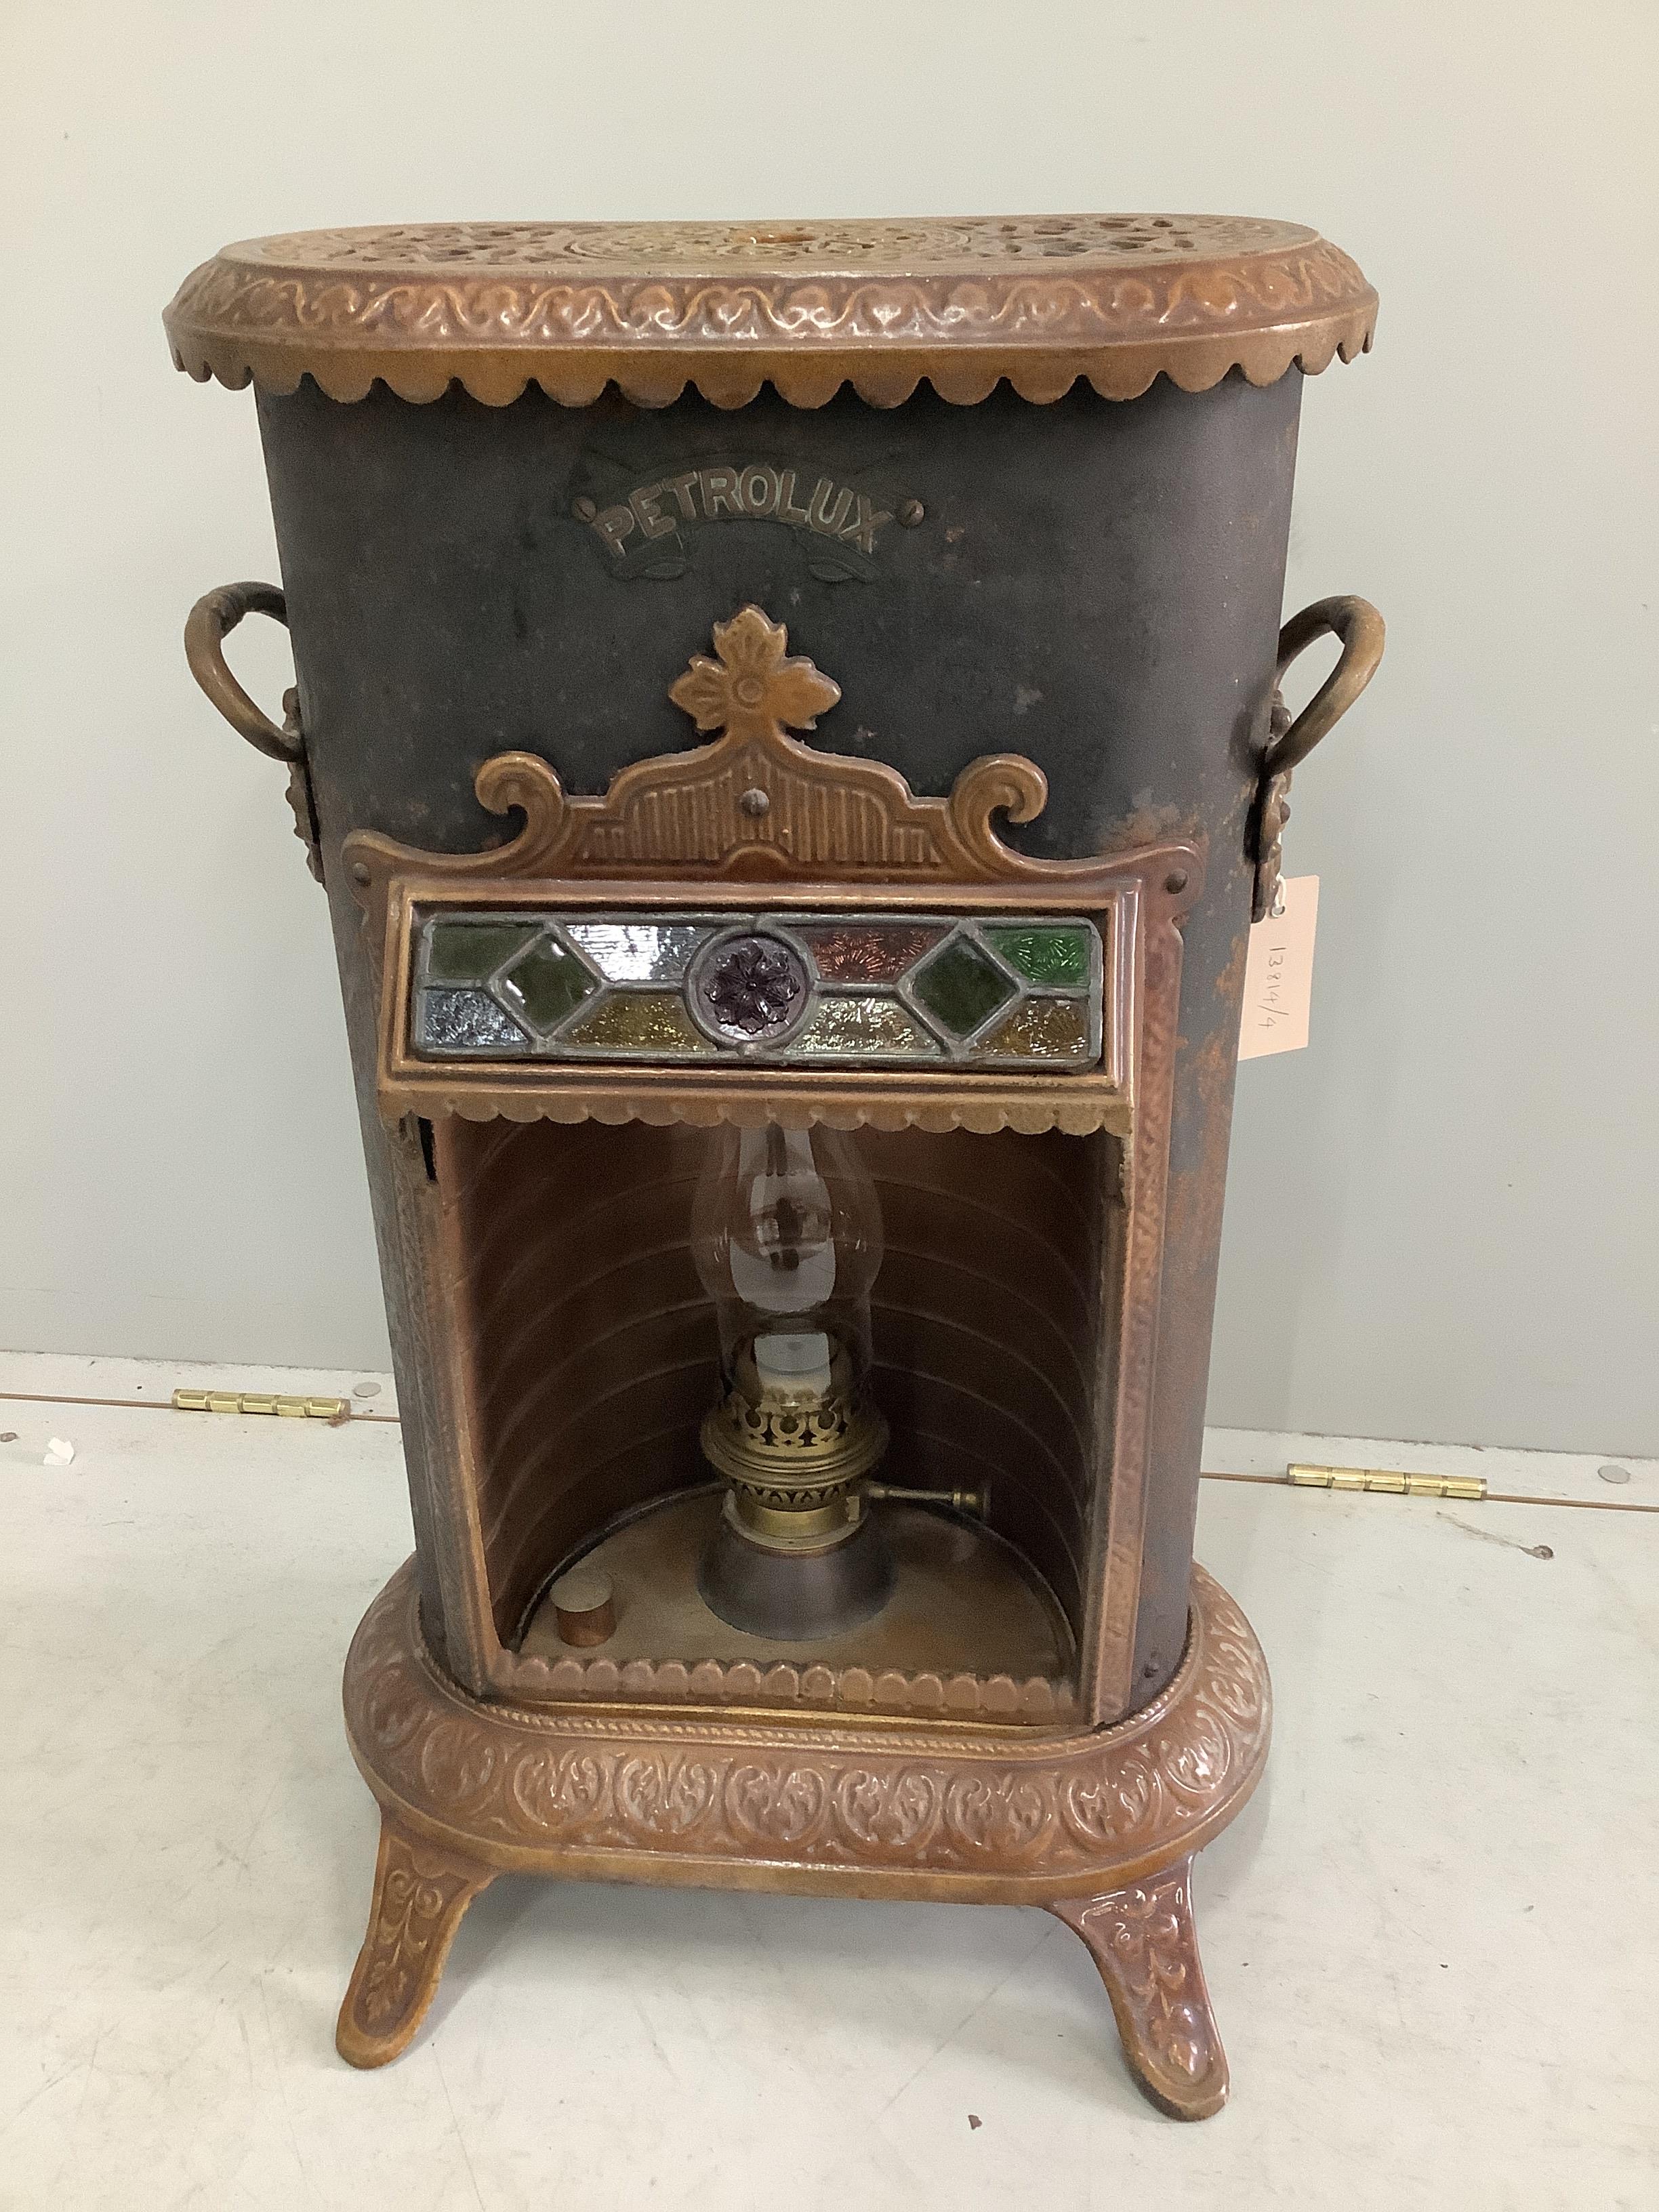 An early 20th century Petrolux cast iron heater, height 68cm